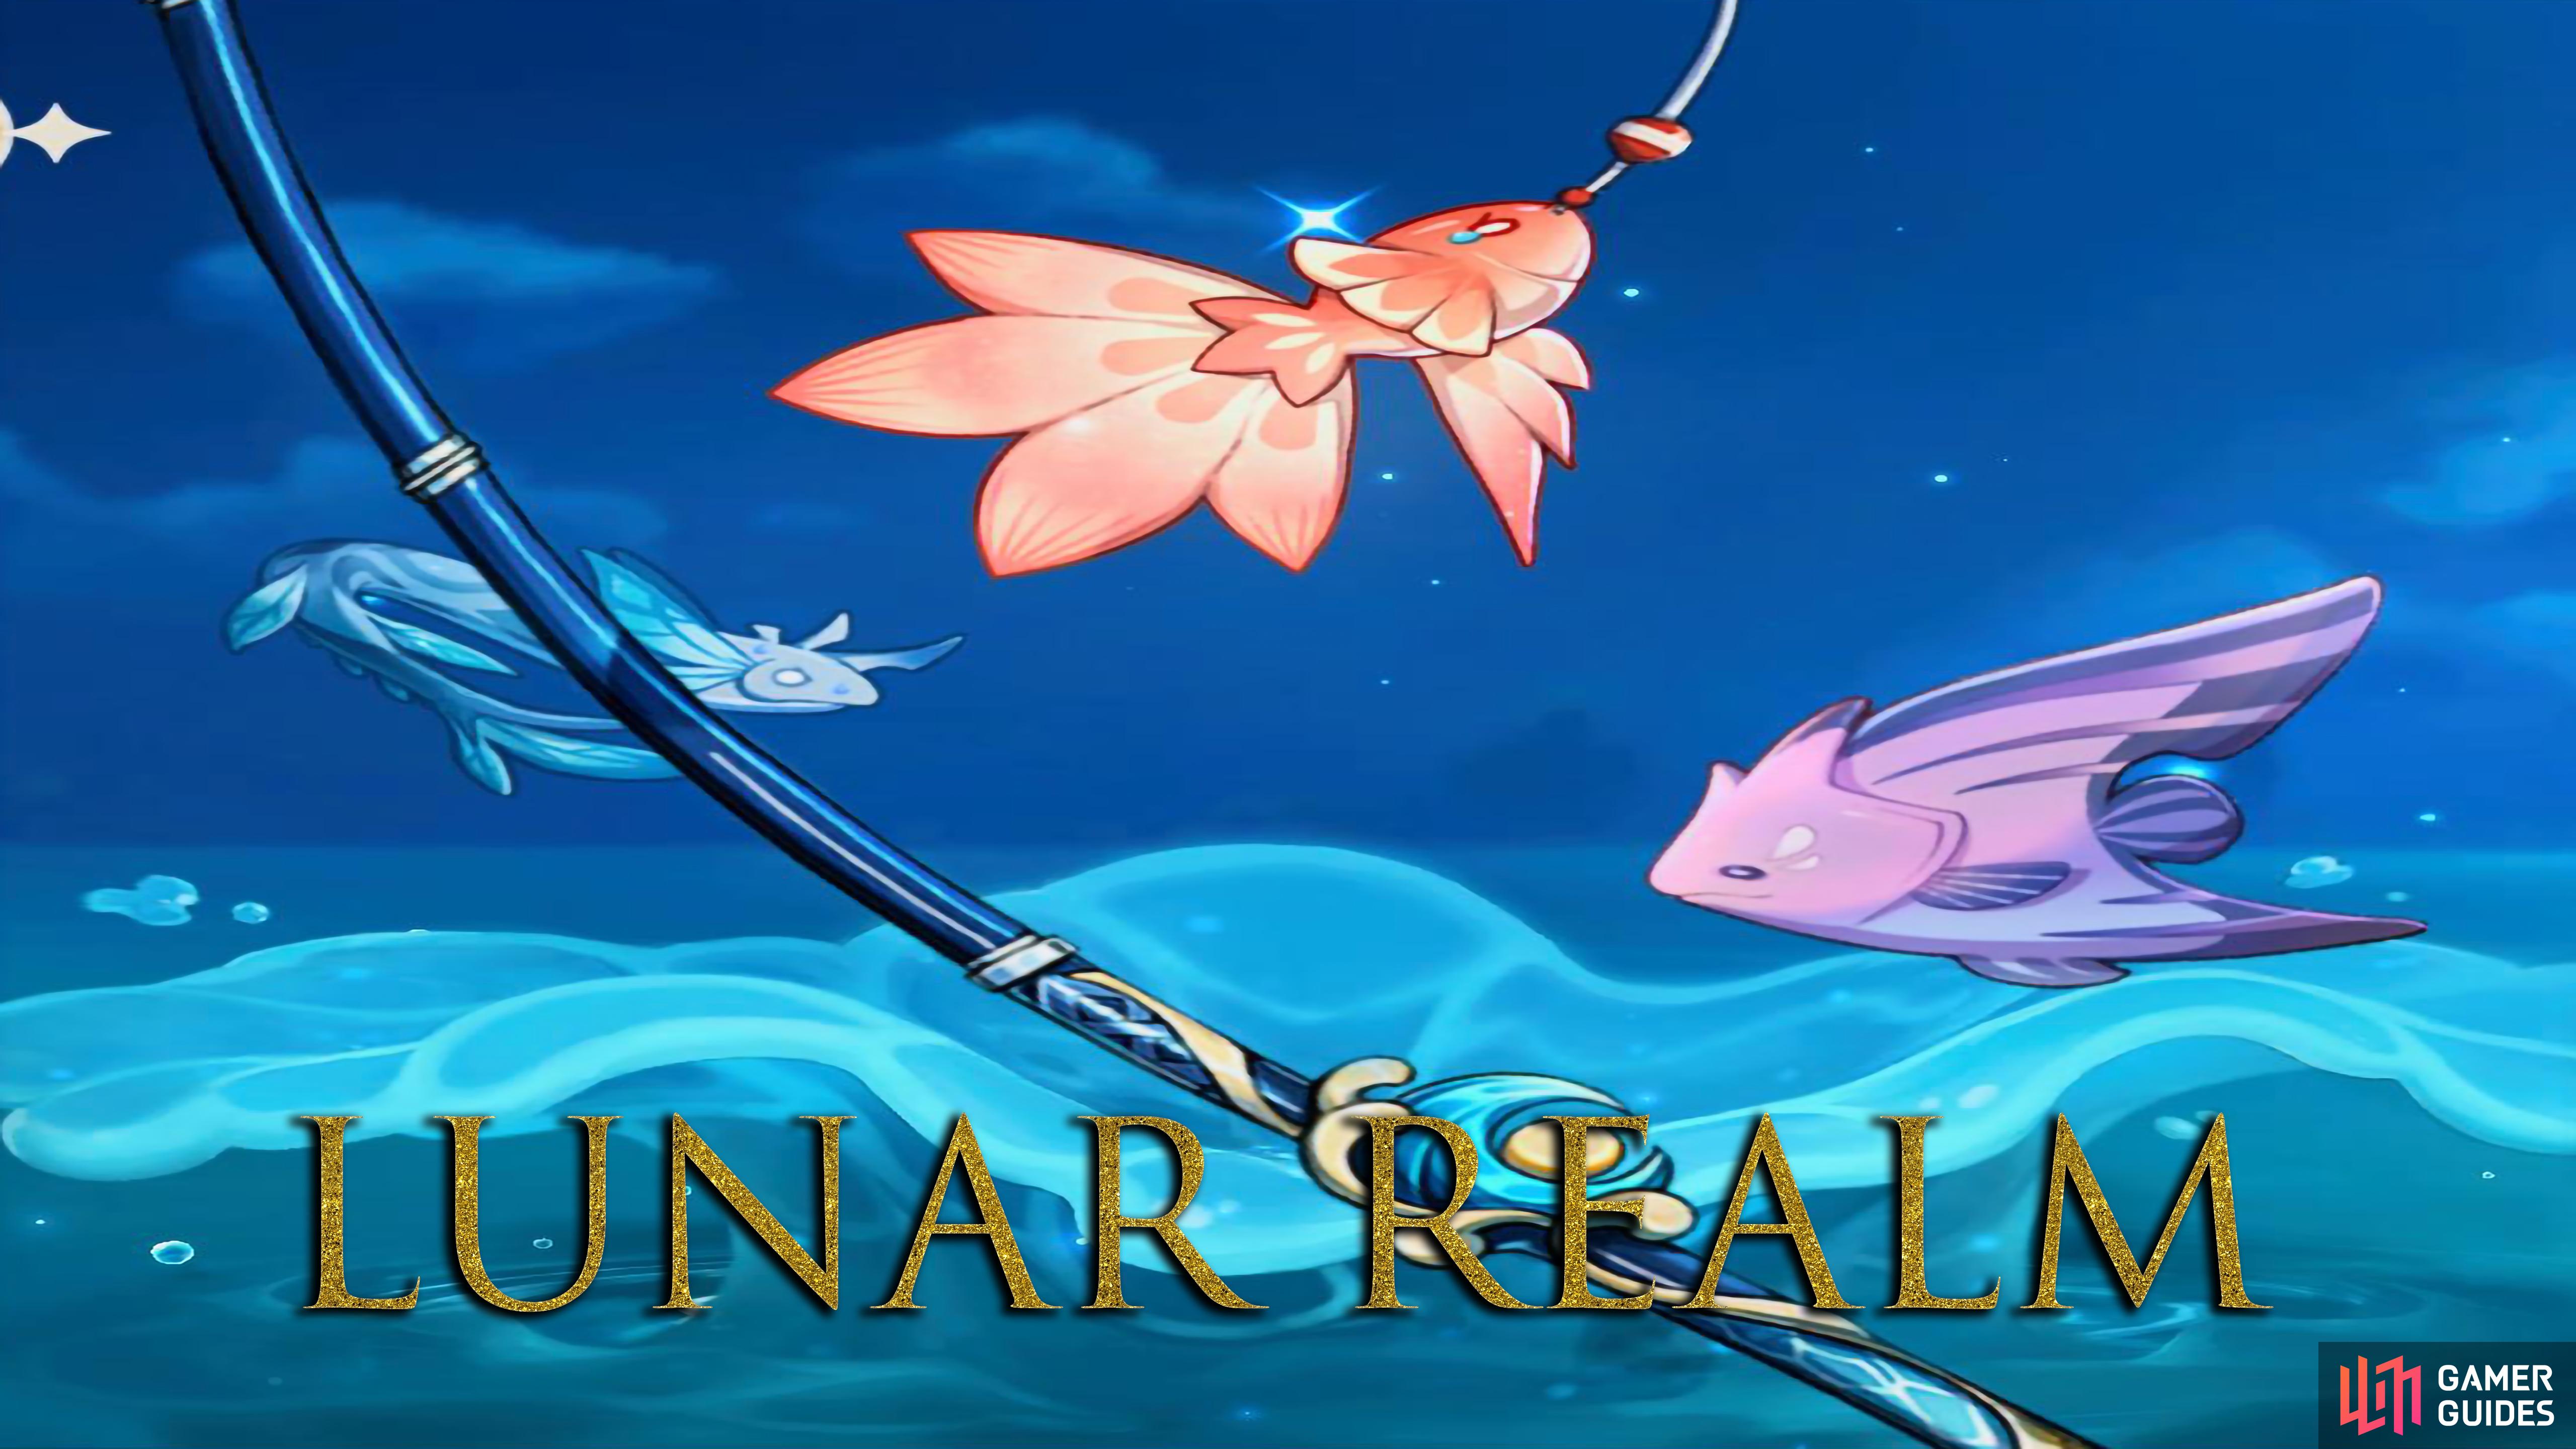 The Lunar Realm is a Fishing Event which rewards the exclusive "Moonstringer" fishing rod.